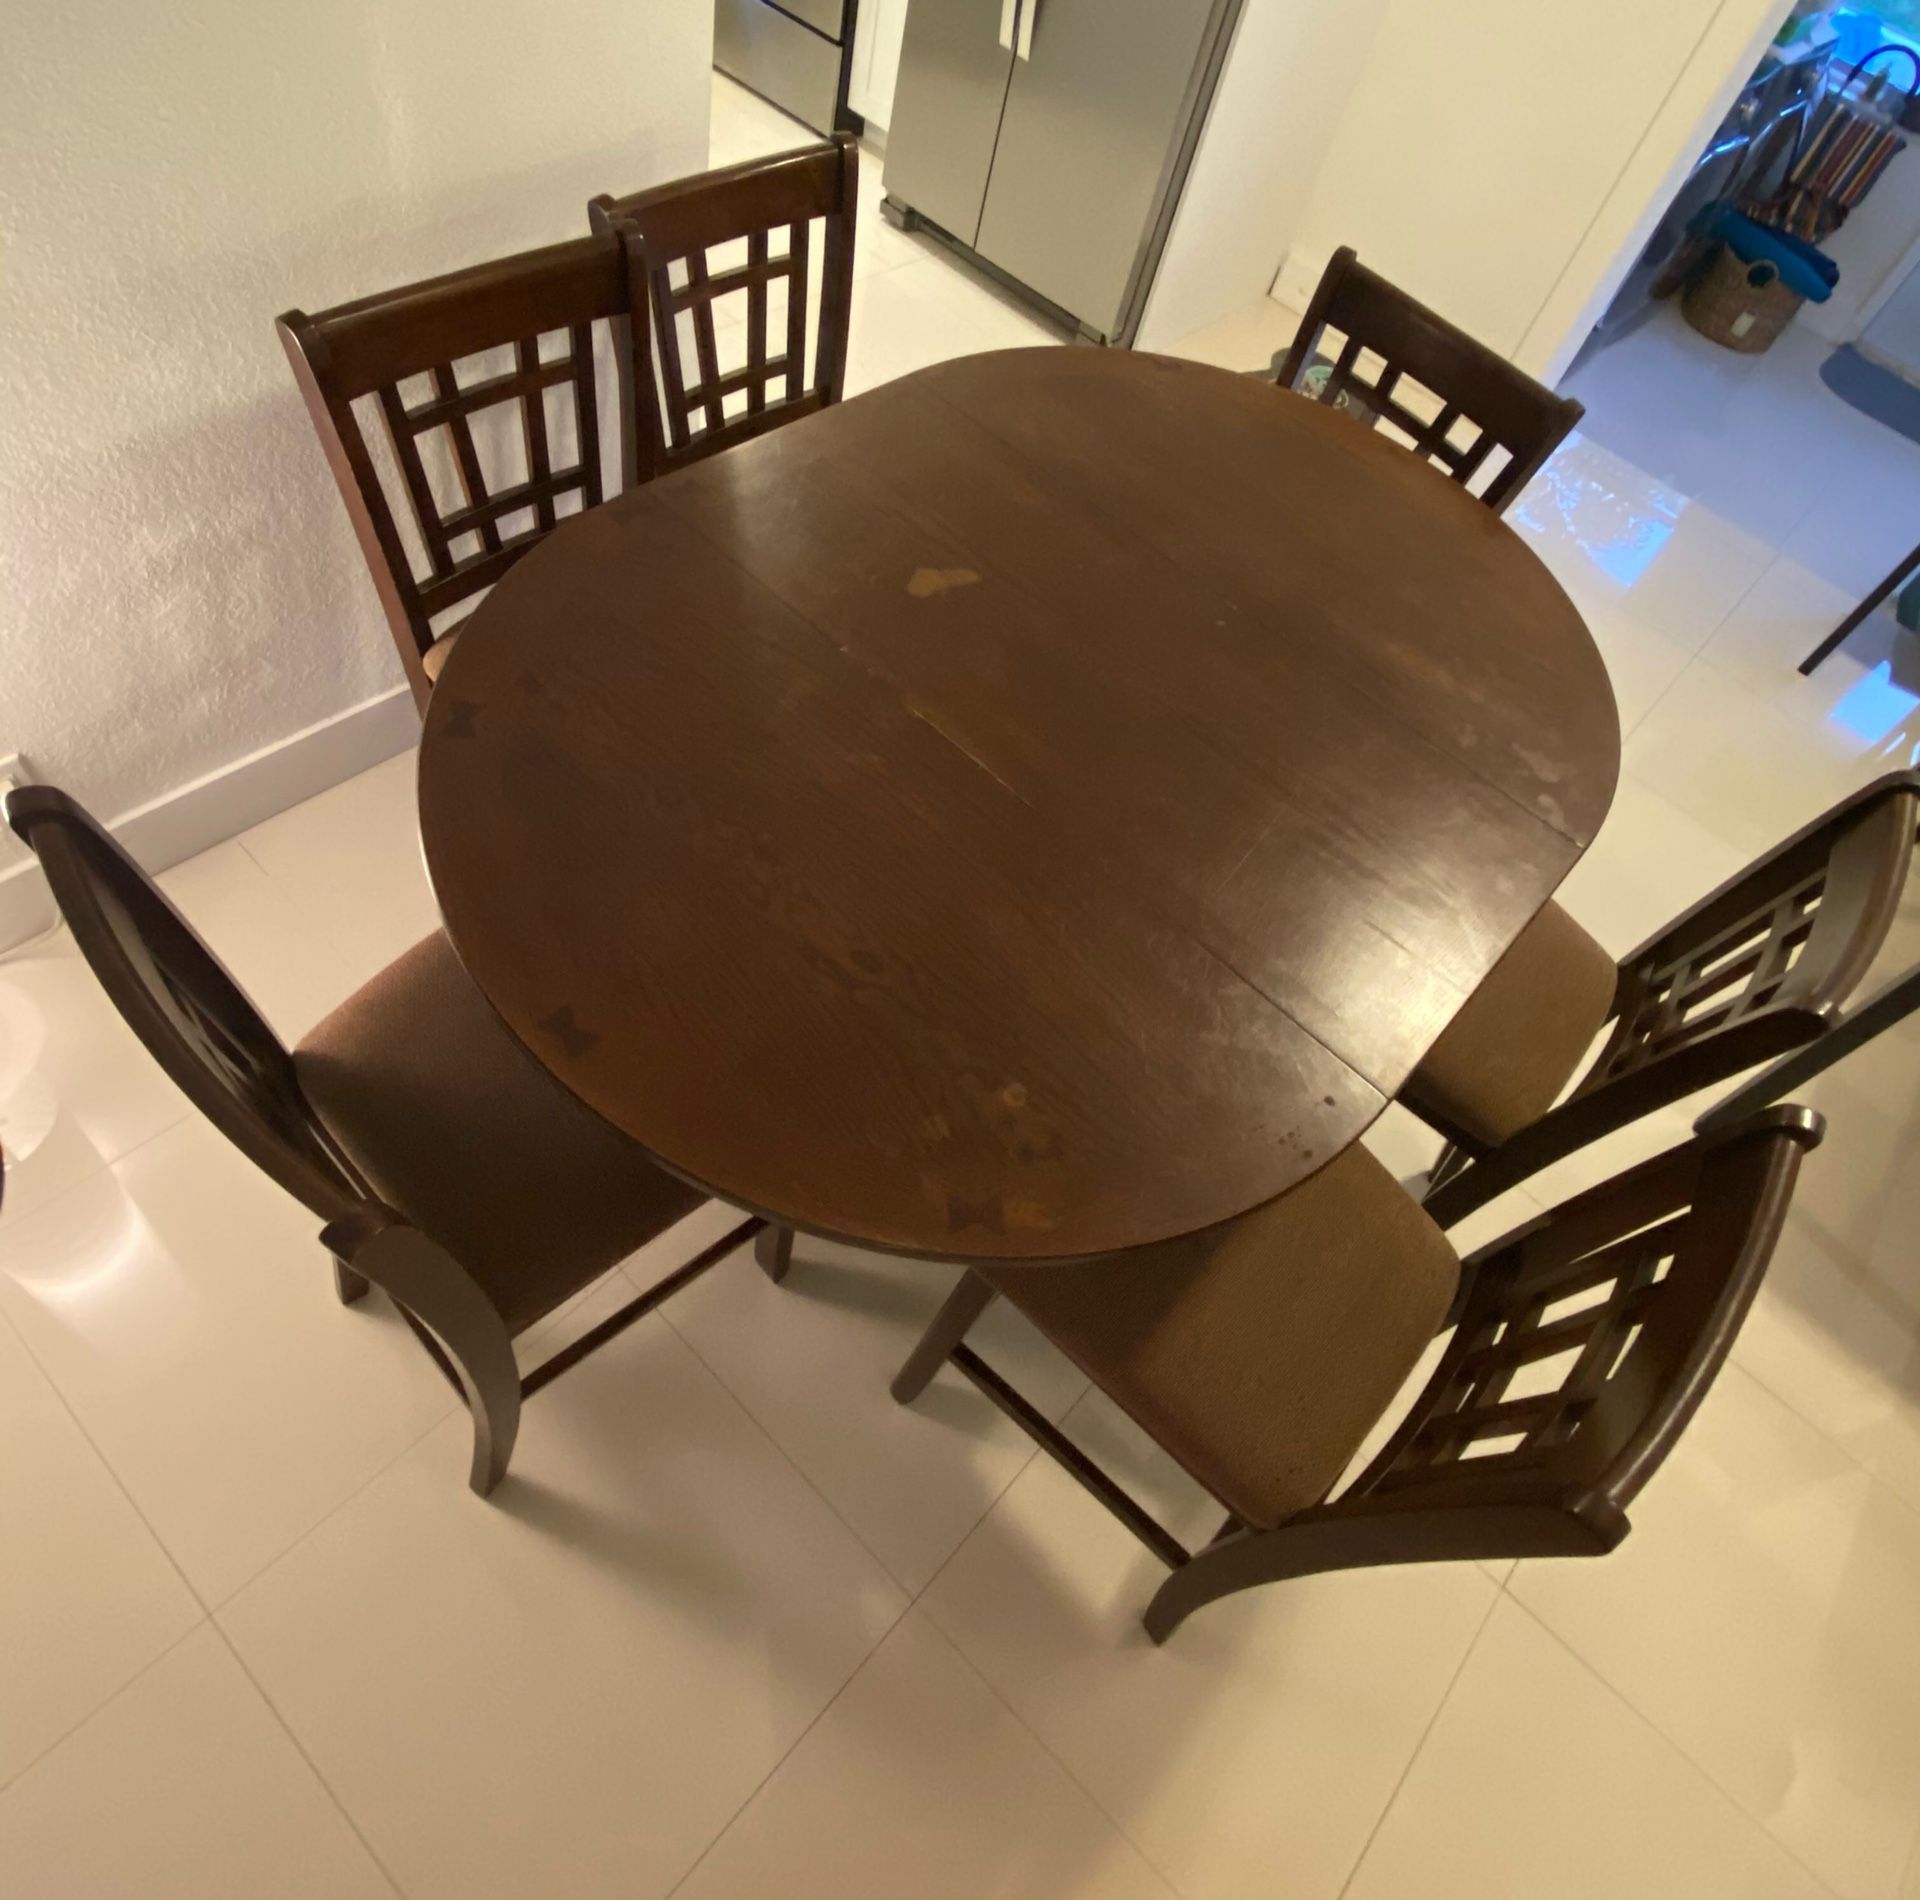 6 chair table set